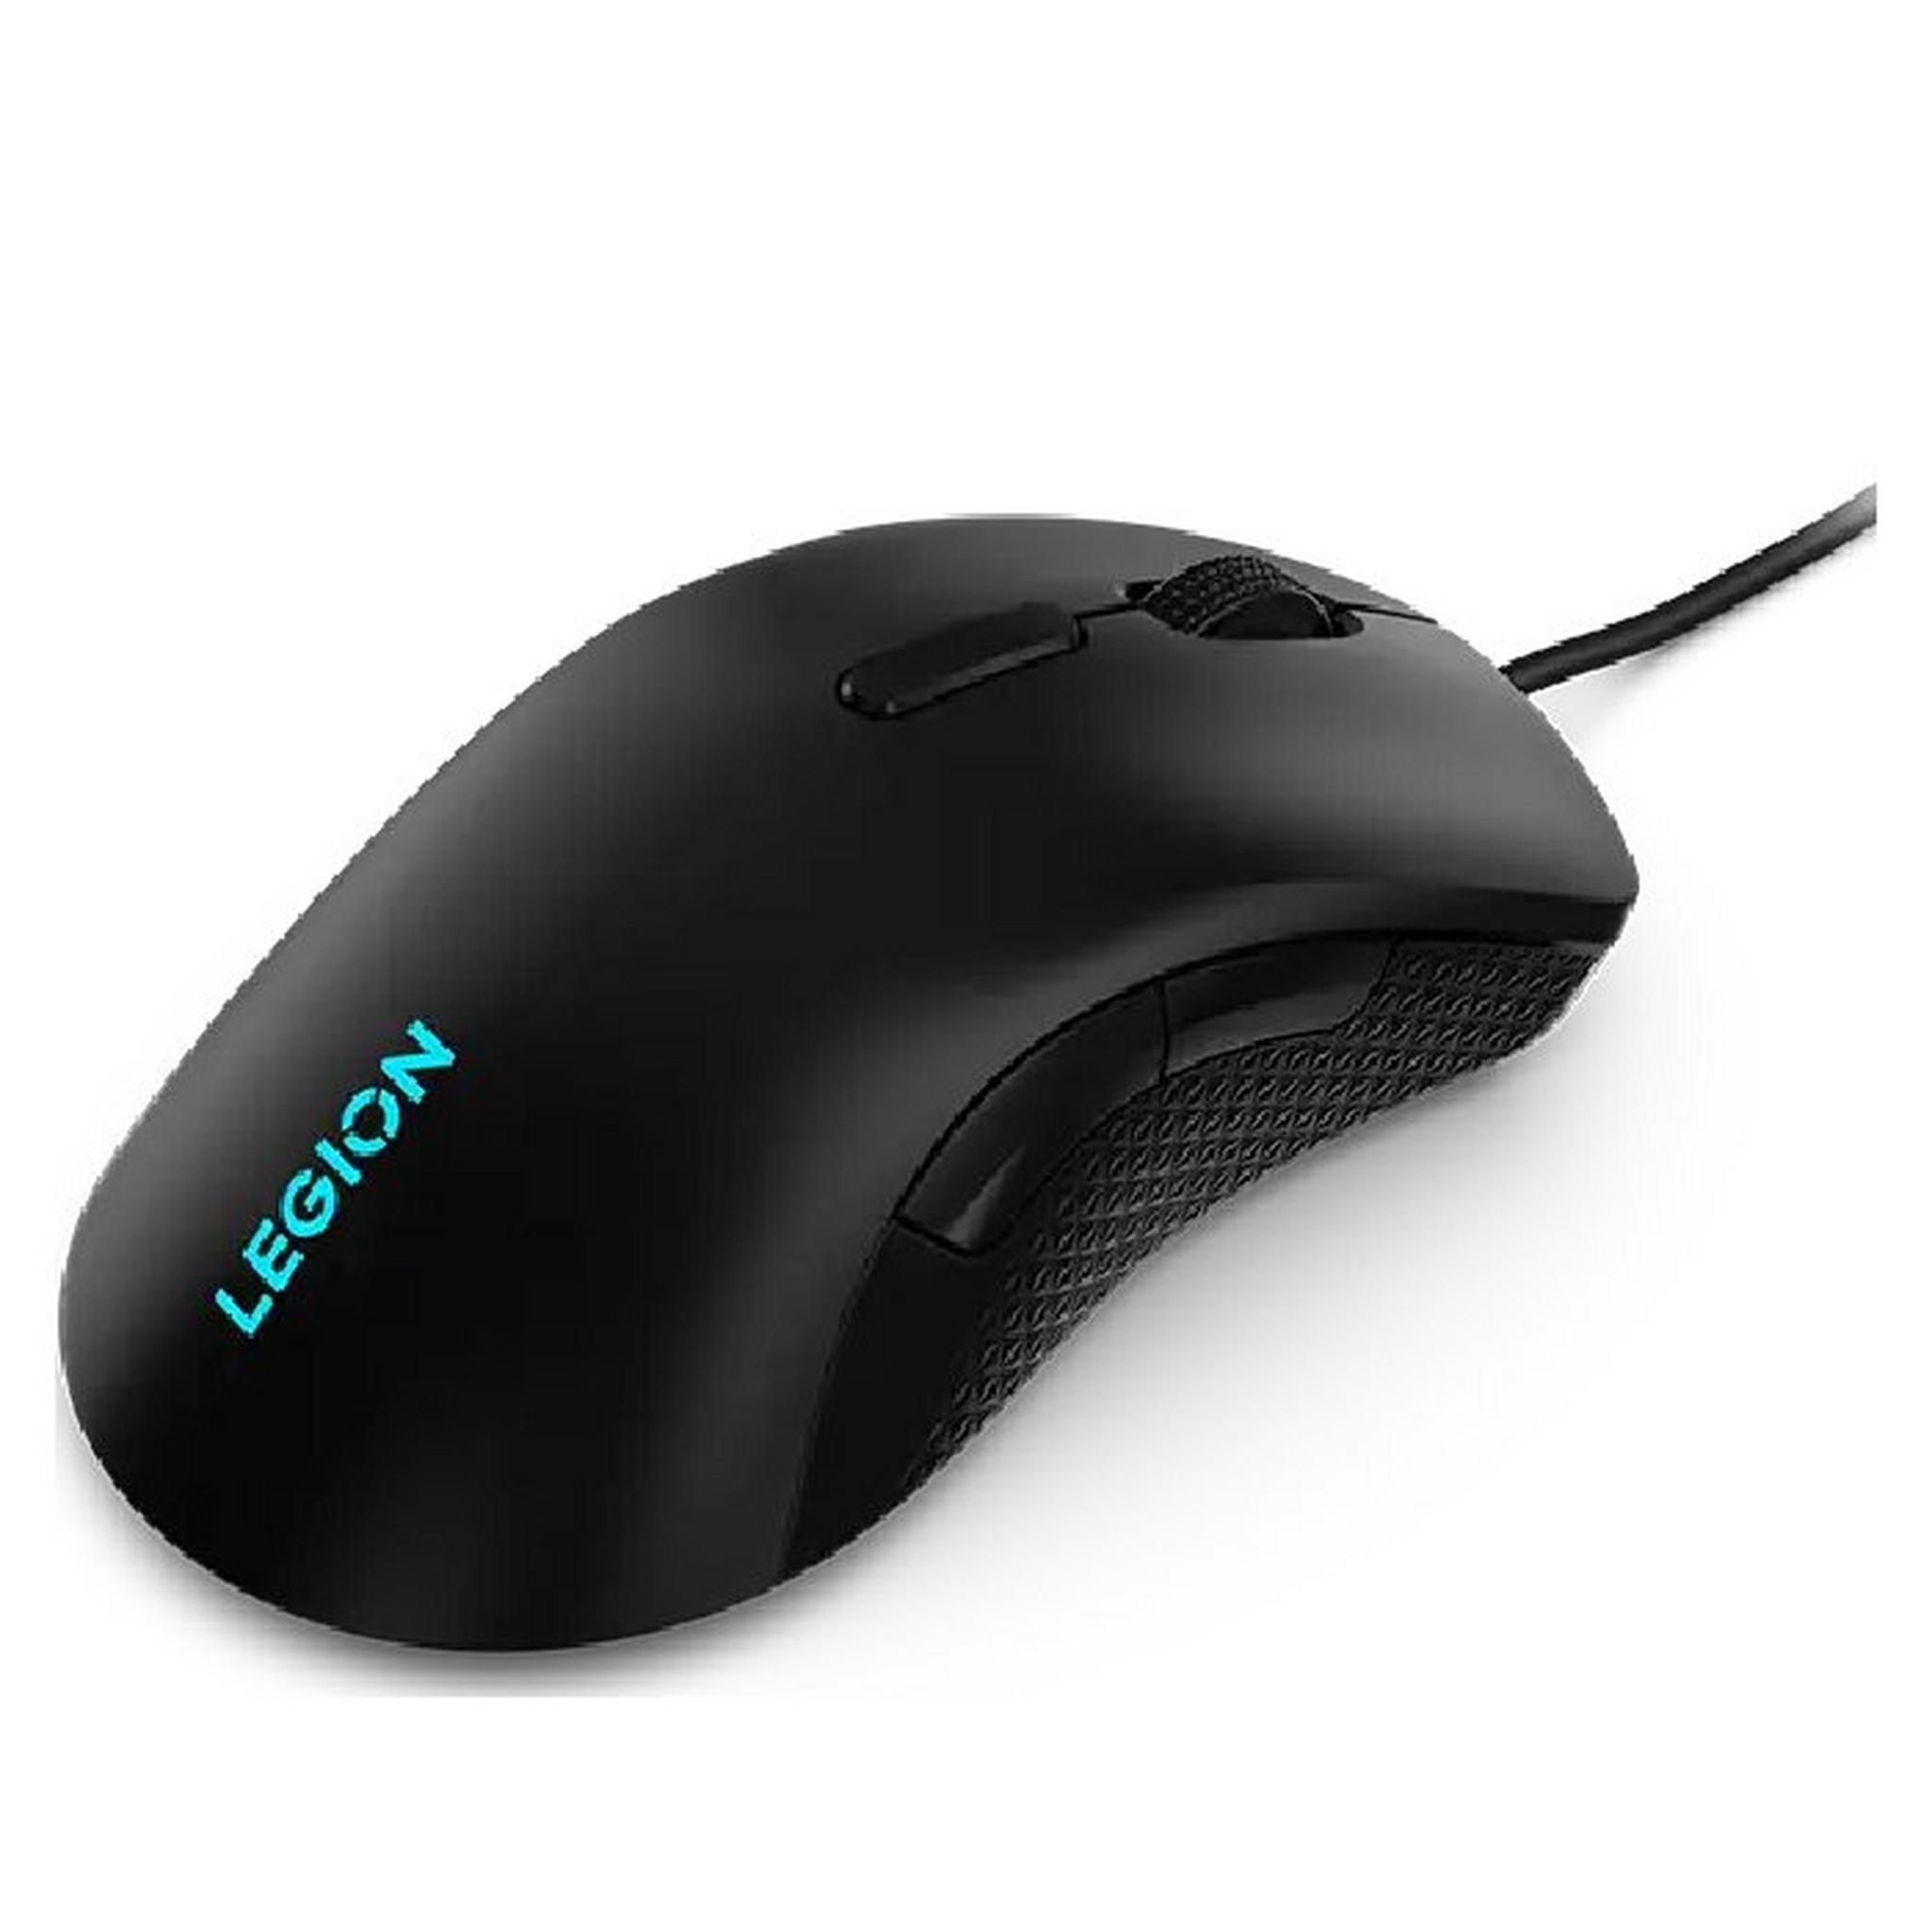 Lenovo Legion Wired Gaming Mouse, M300/RGB, GY50X79384 – Black